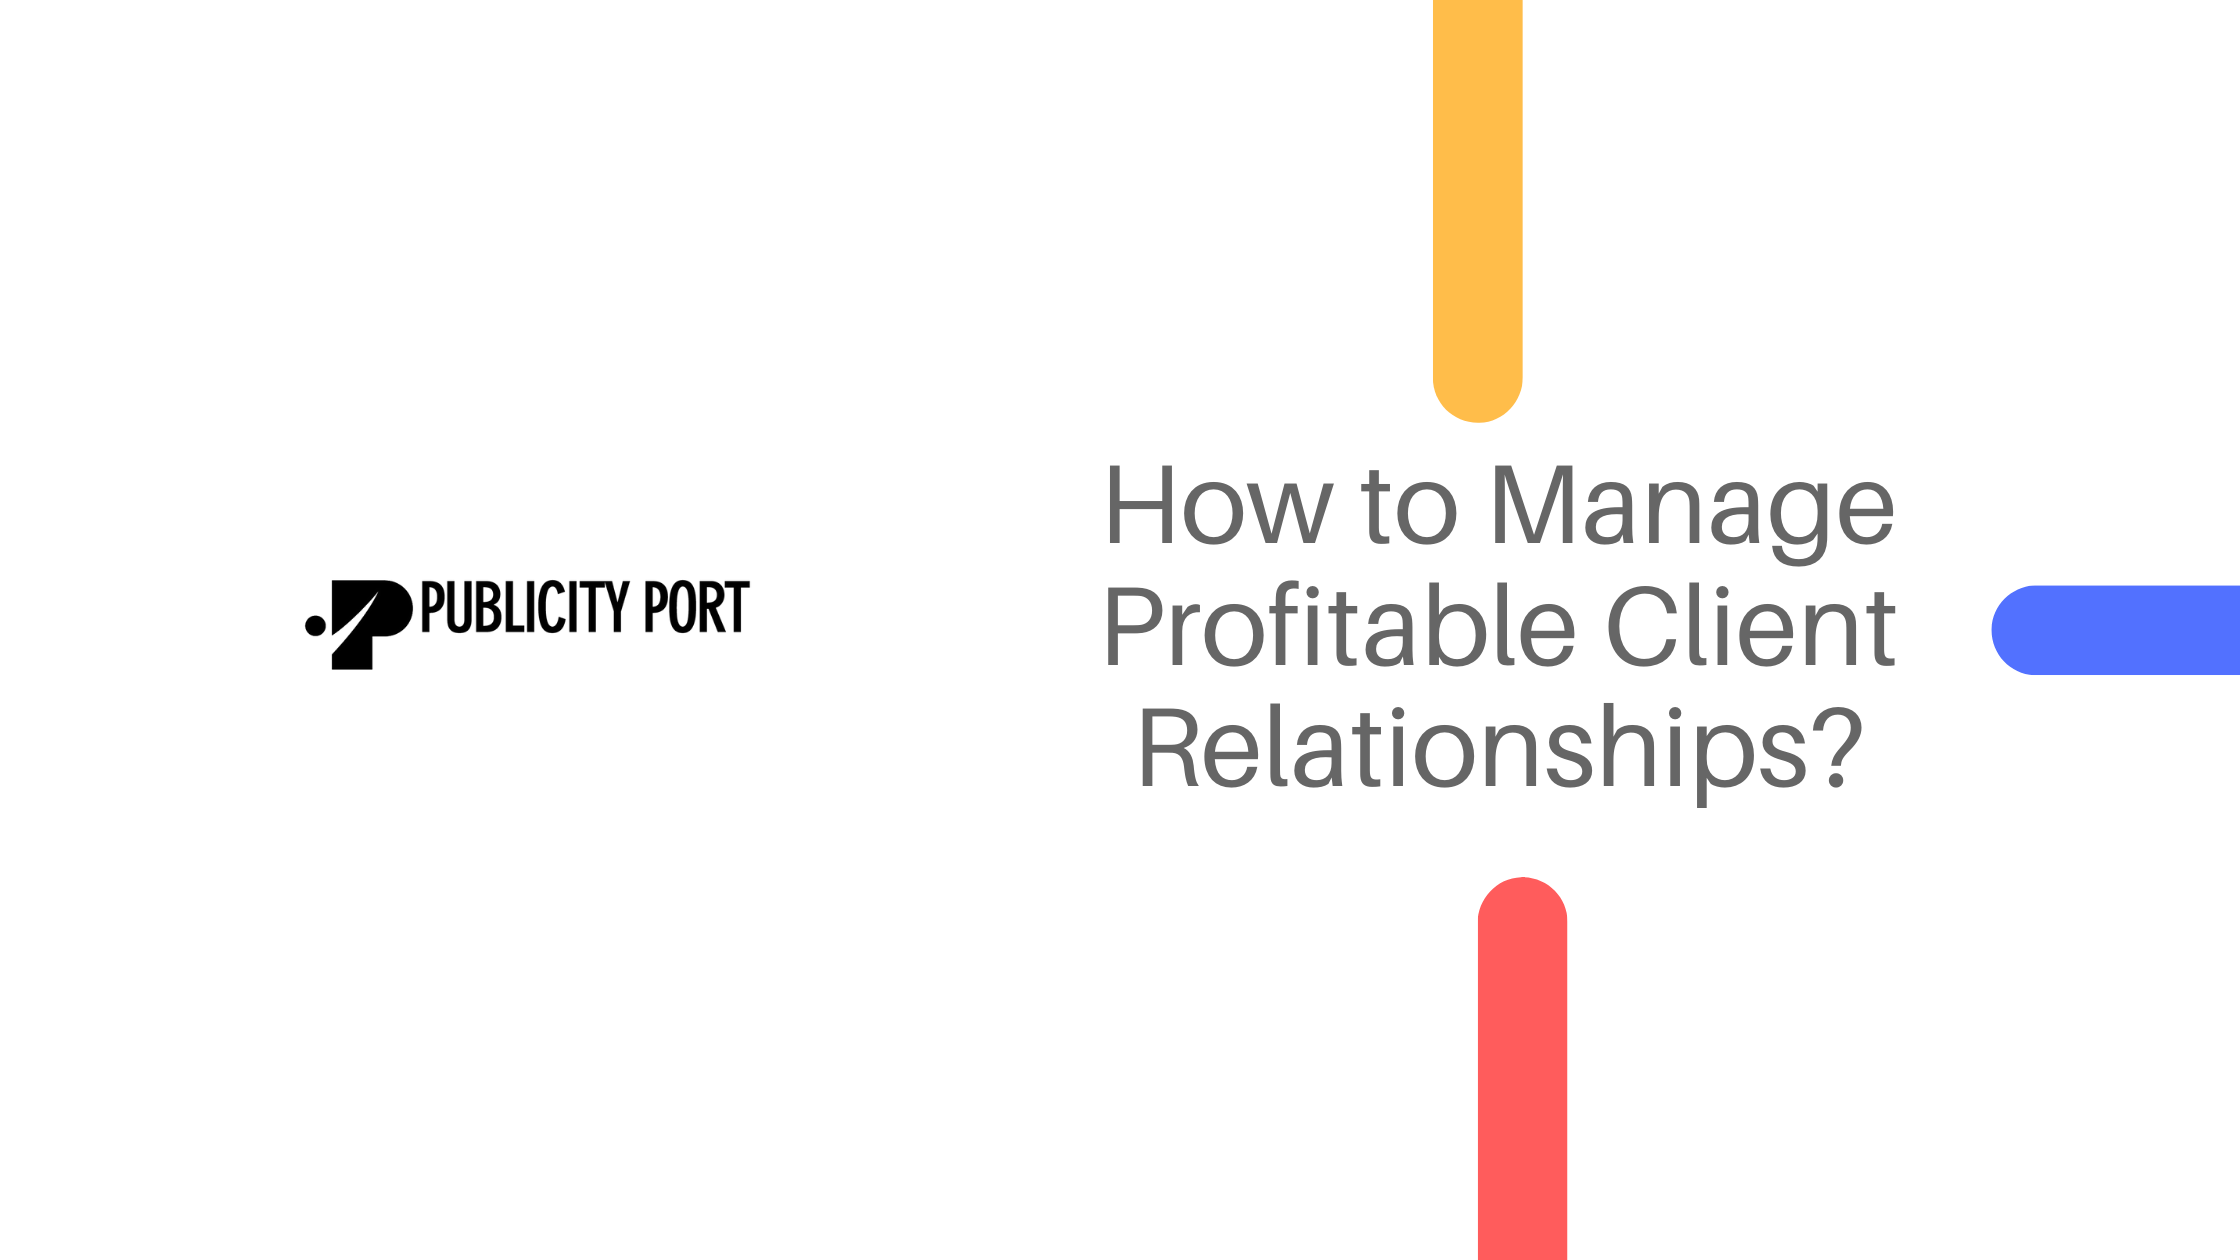 How to Manage Profitable Client Relationships